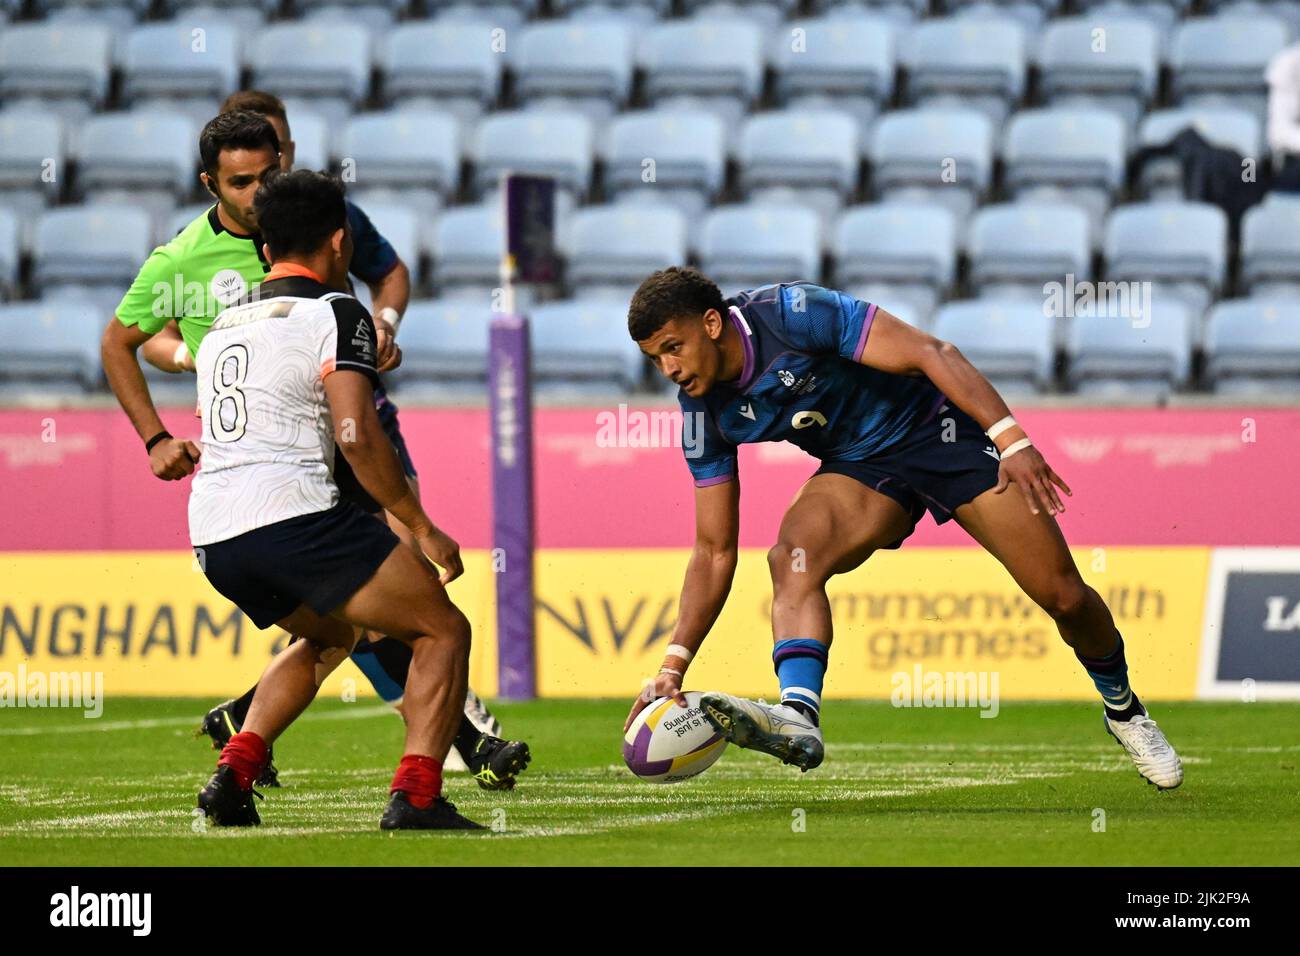 Jake Henry of Scotland scores a try against Malaysia during the Rugby Sevens at the Commonwealth Games at Coventry Stadium on Friday 29th July 2022